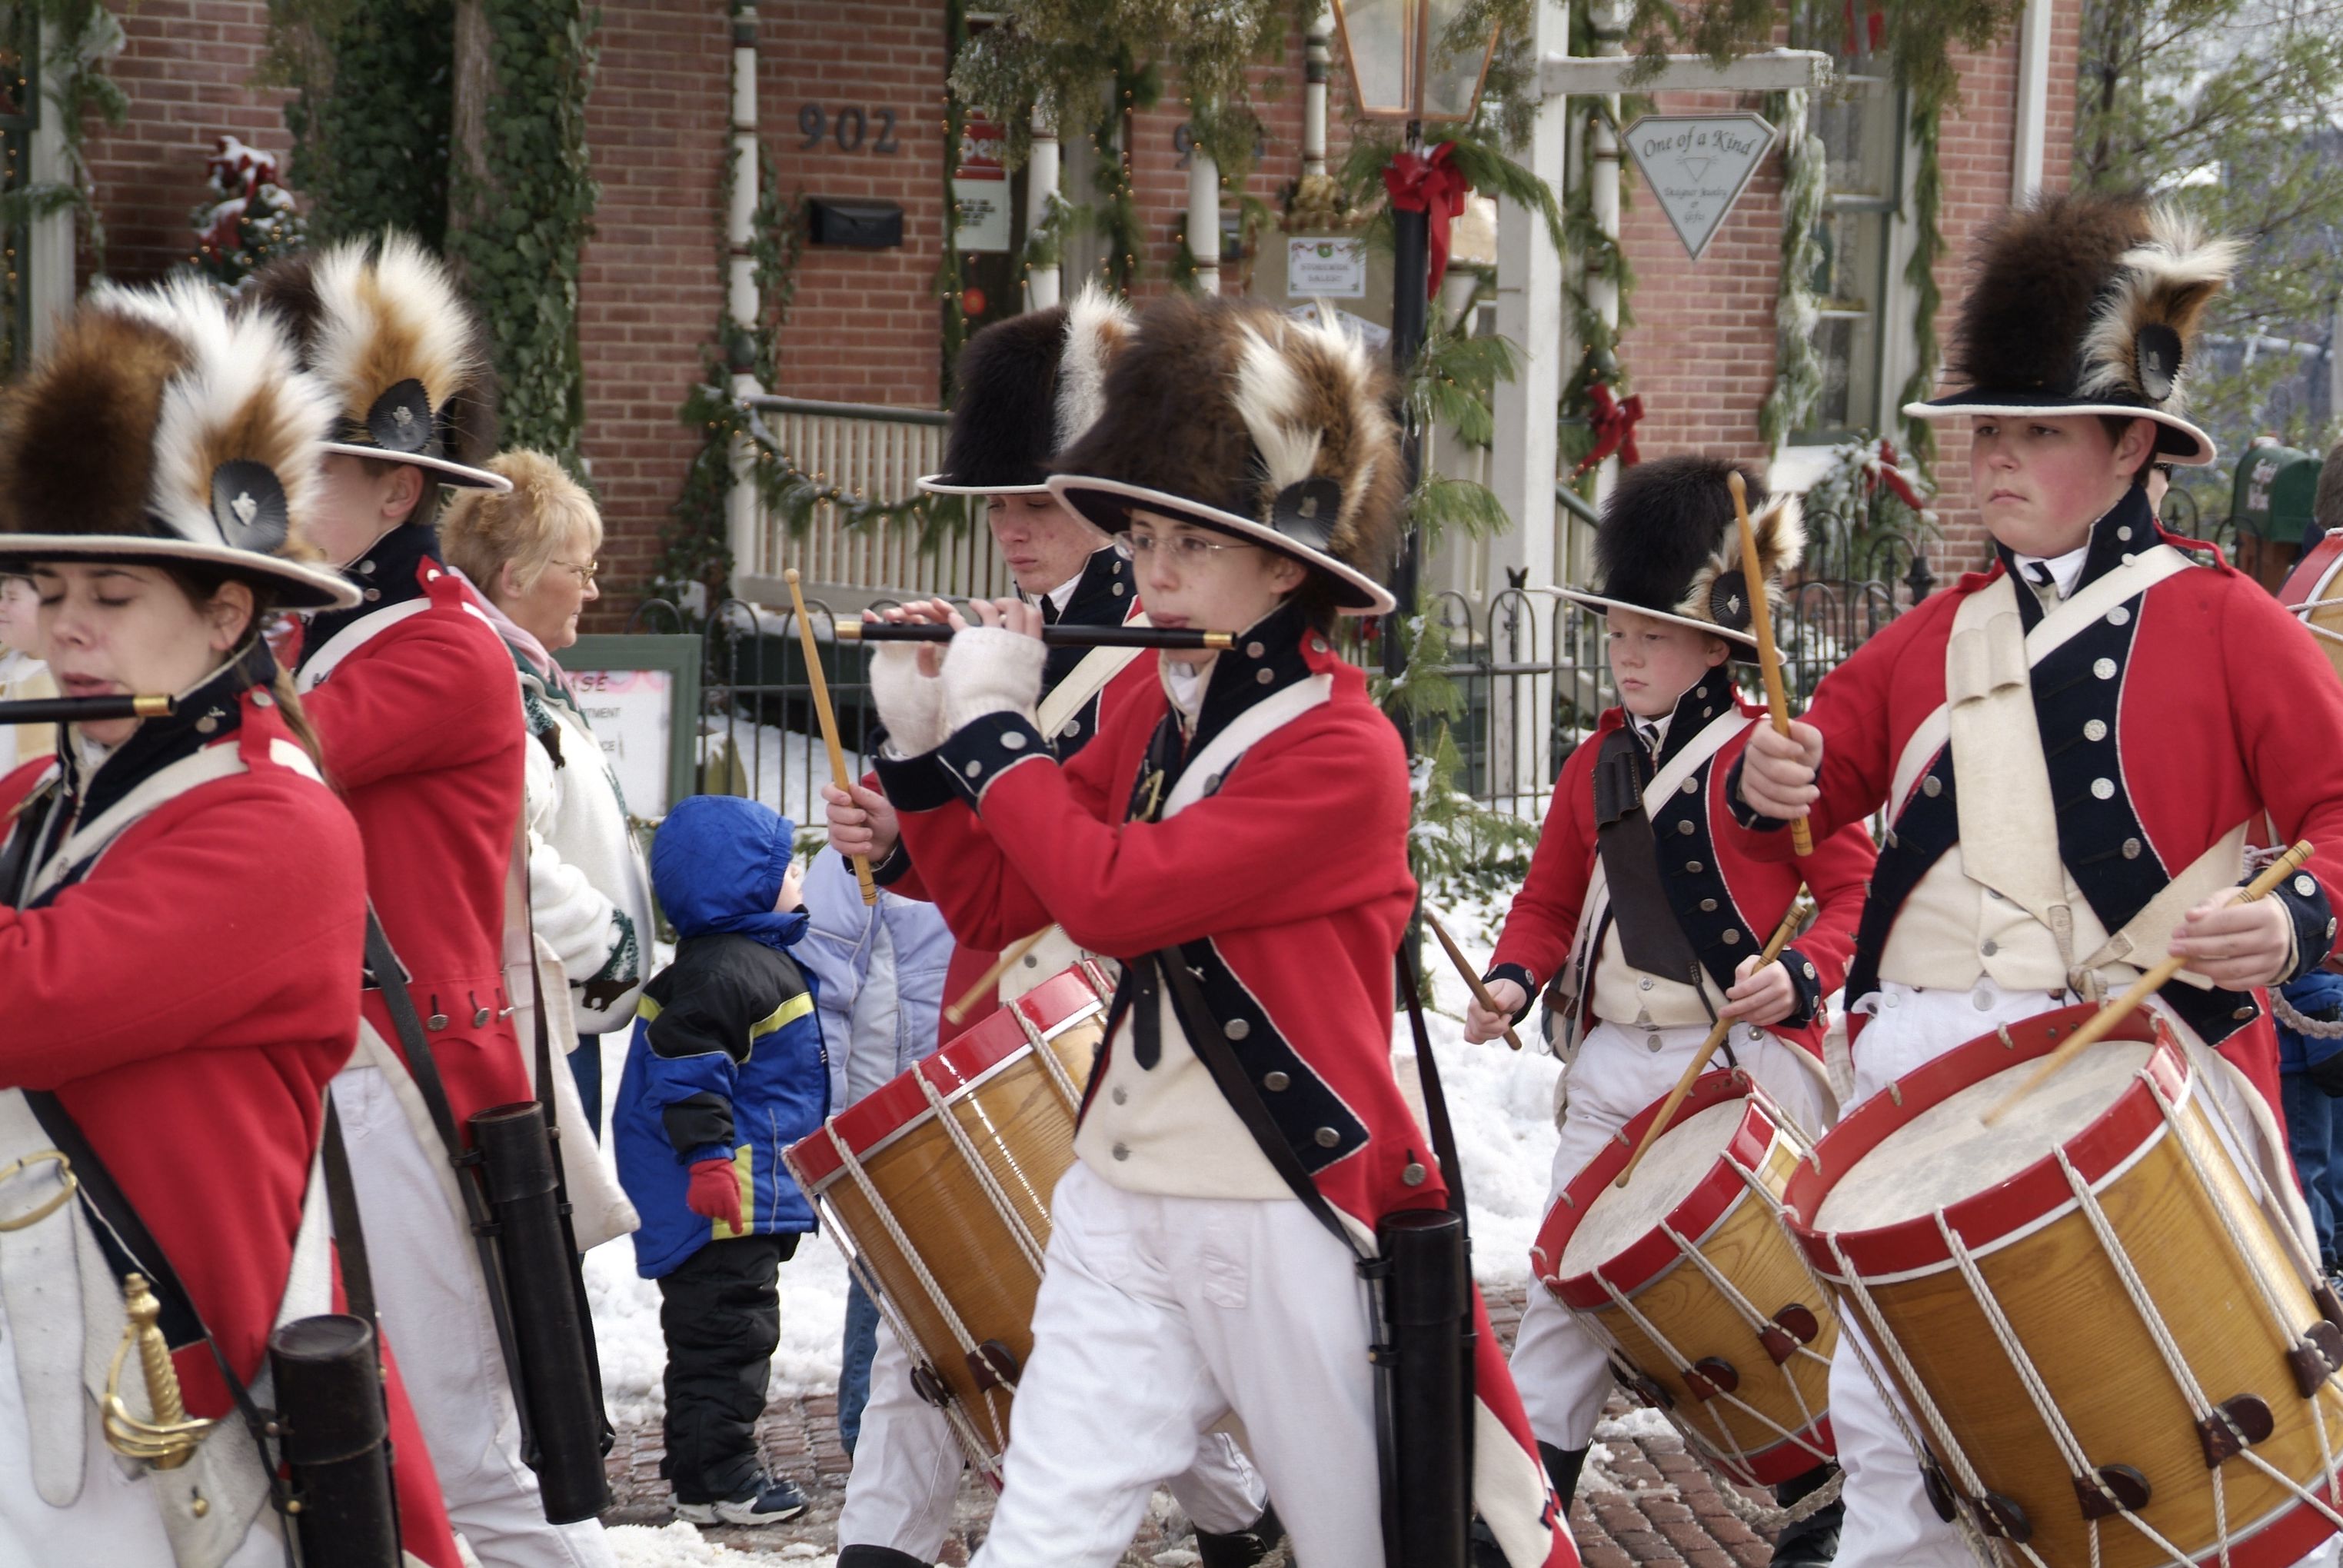 Fife & Drum Corps, St. Charles, photo courtesy City of St. Charles